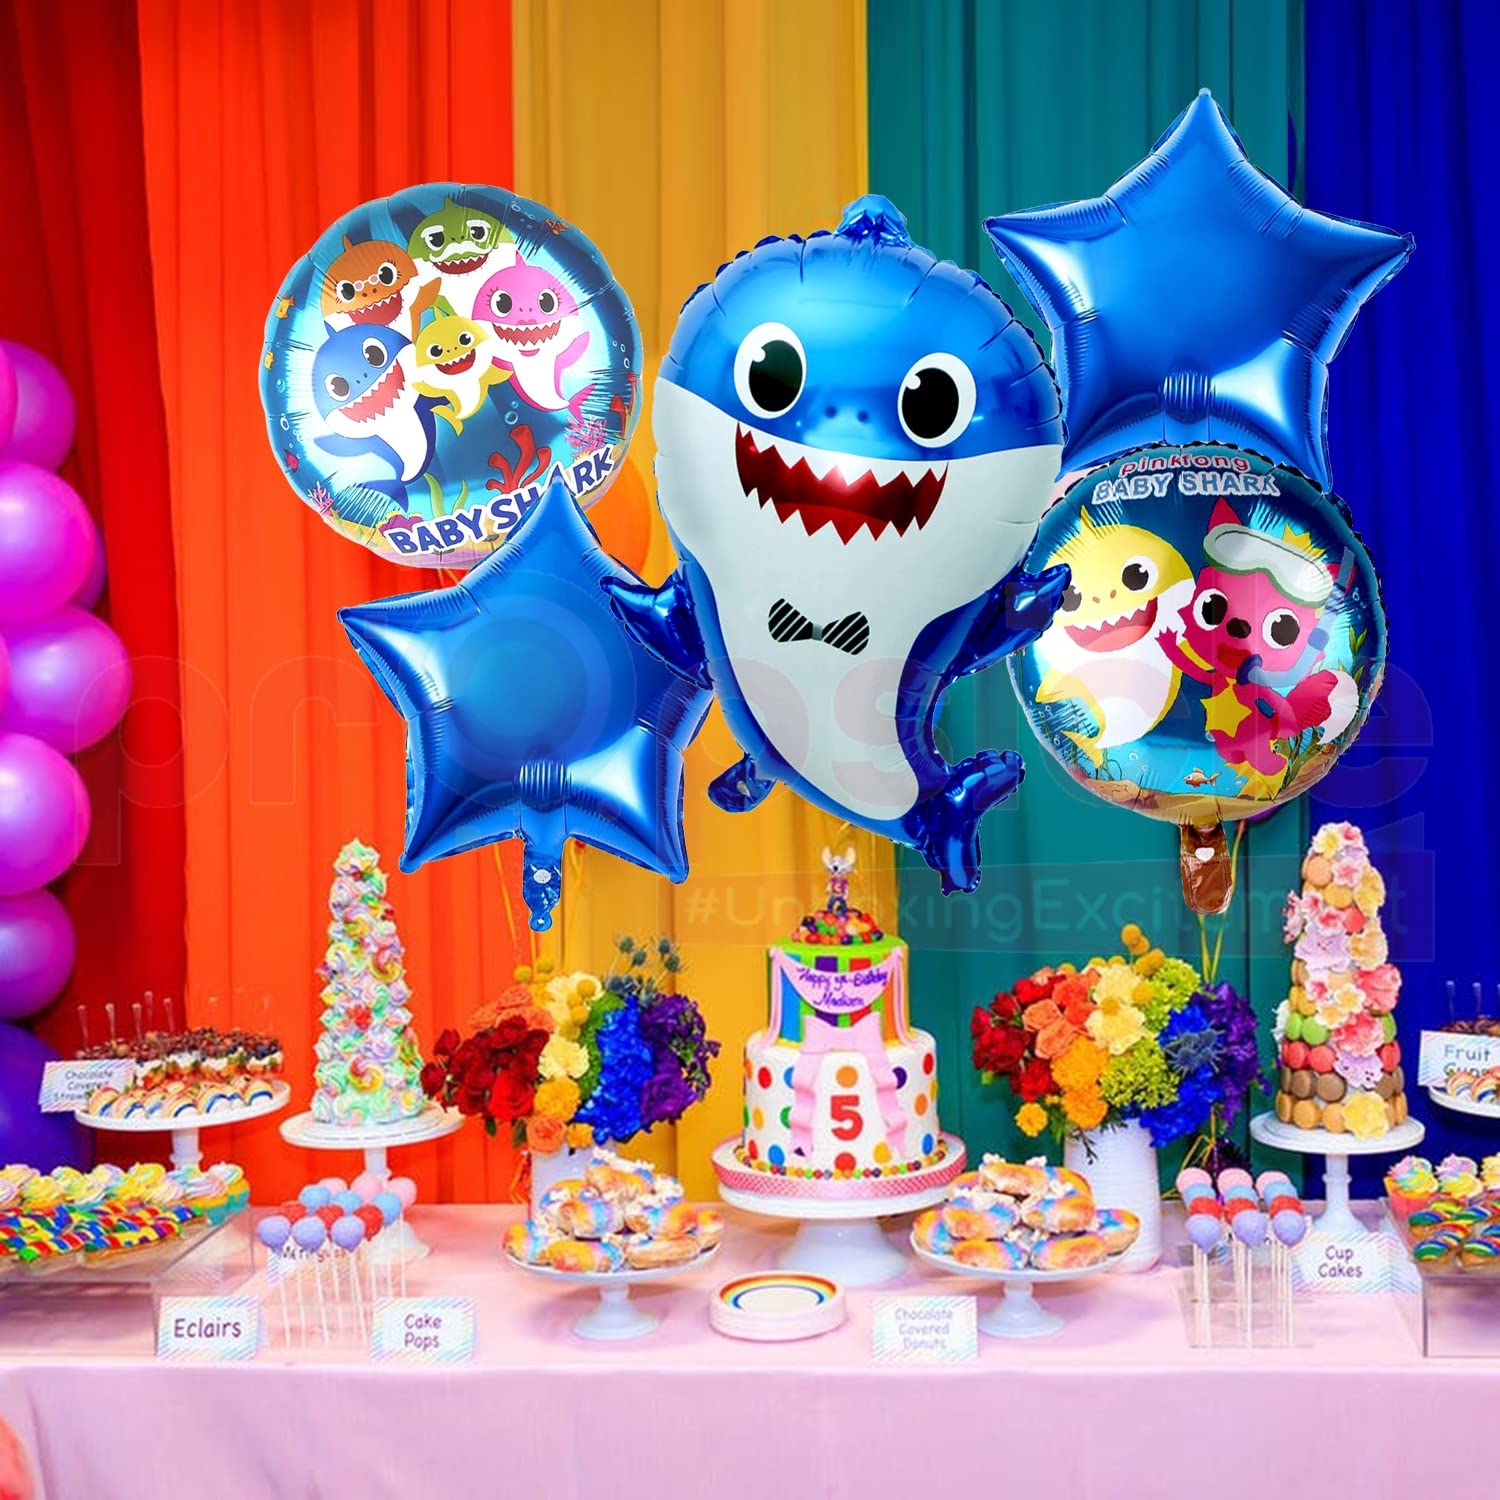 Propsicle Birthday Baby Shark Decorations Foil Blue Balloon Pack of 5 –  Propsicle